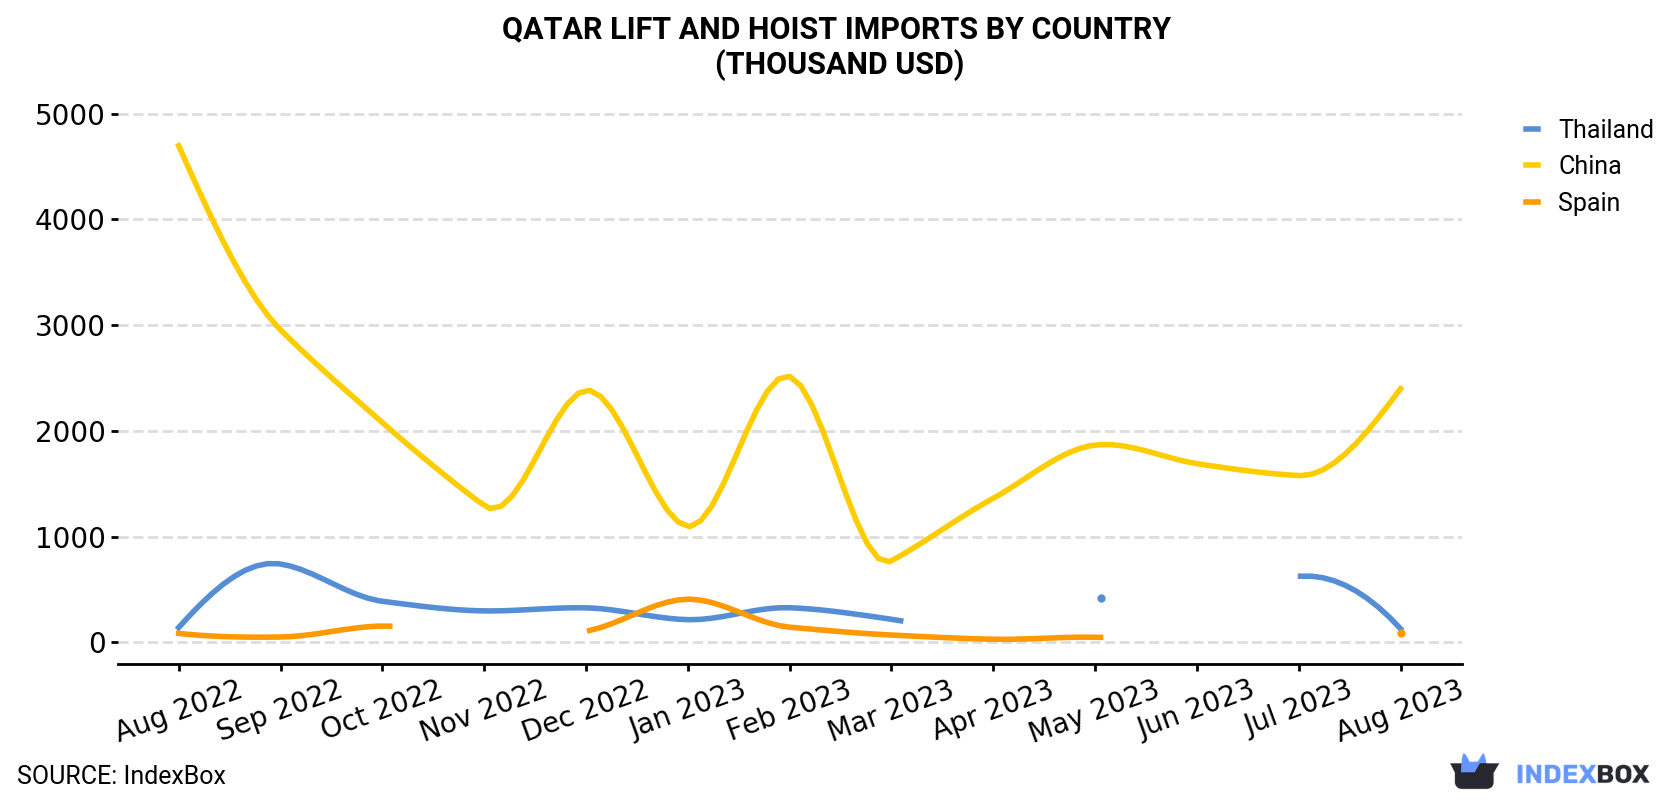 Qatar Lift And Hoist Imports By Country (Thousand USD)